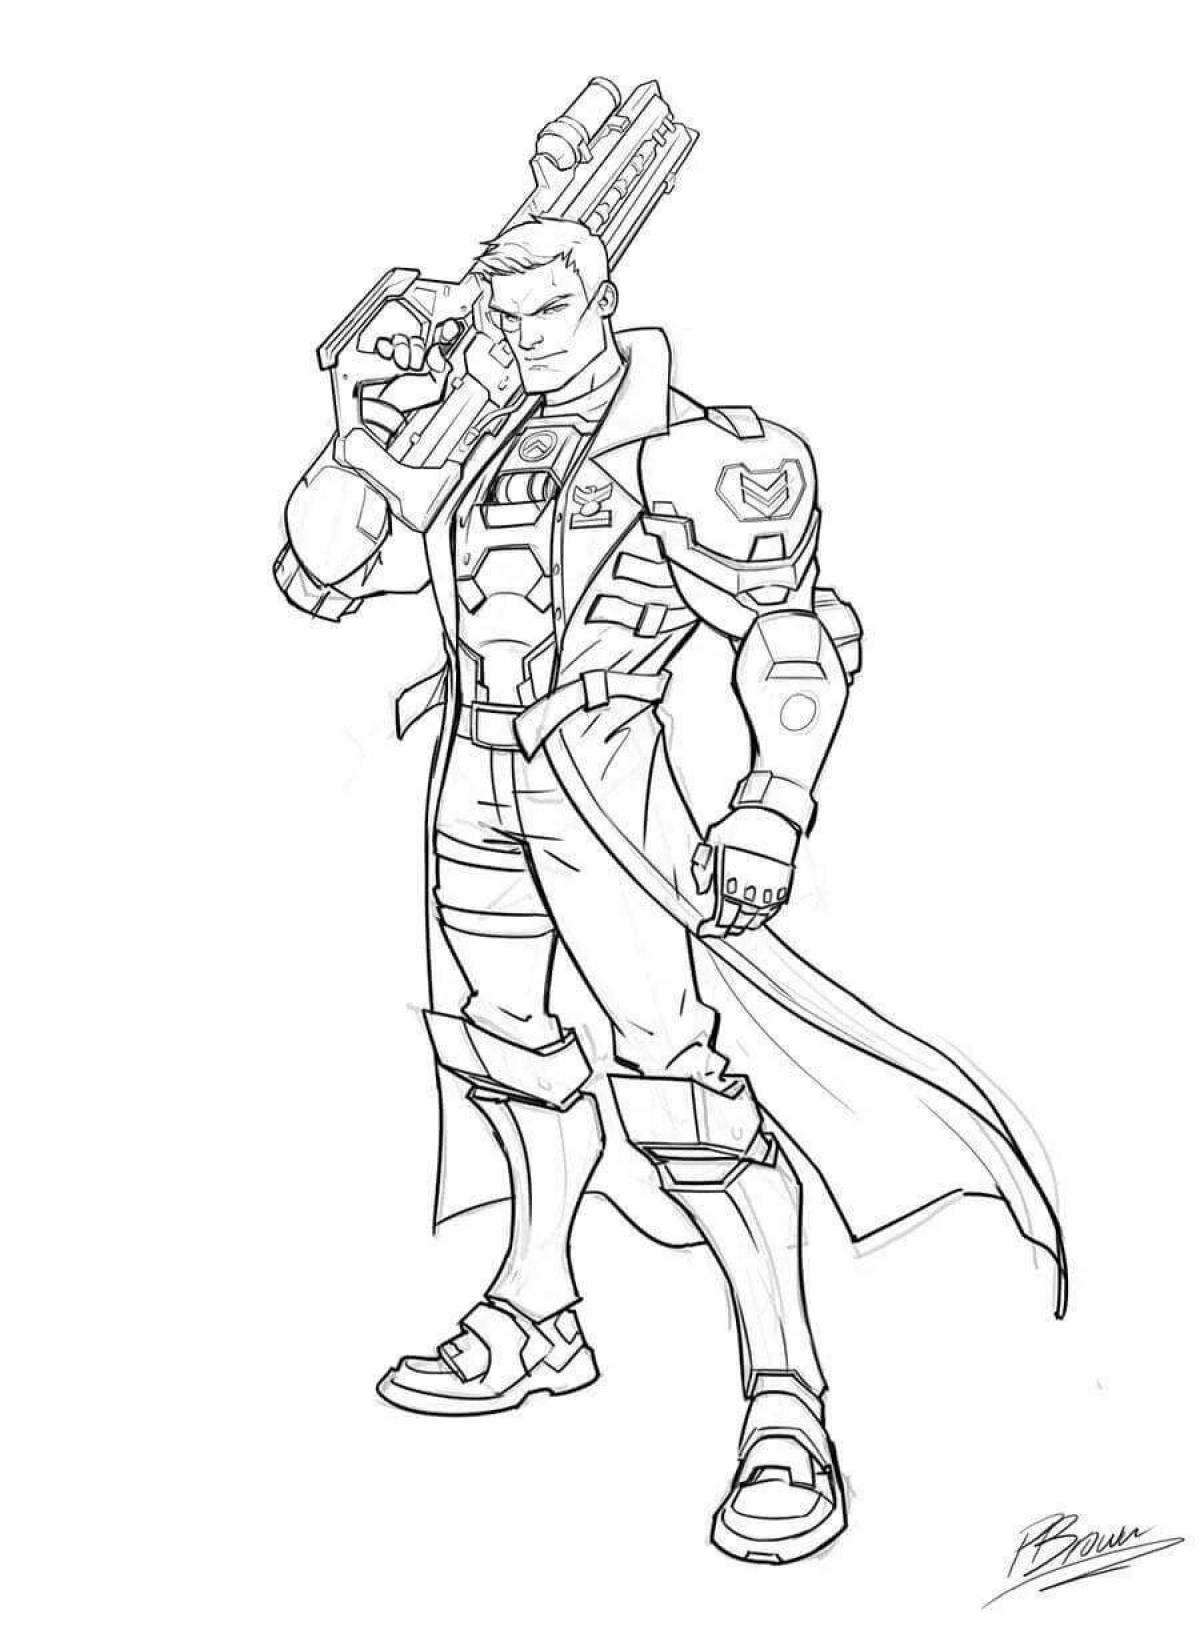 Colorful overwatch coloring page